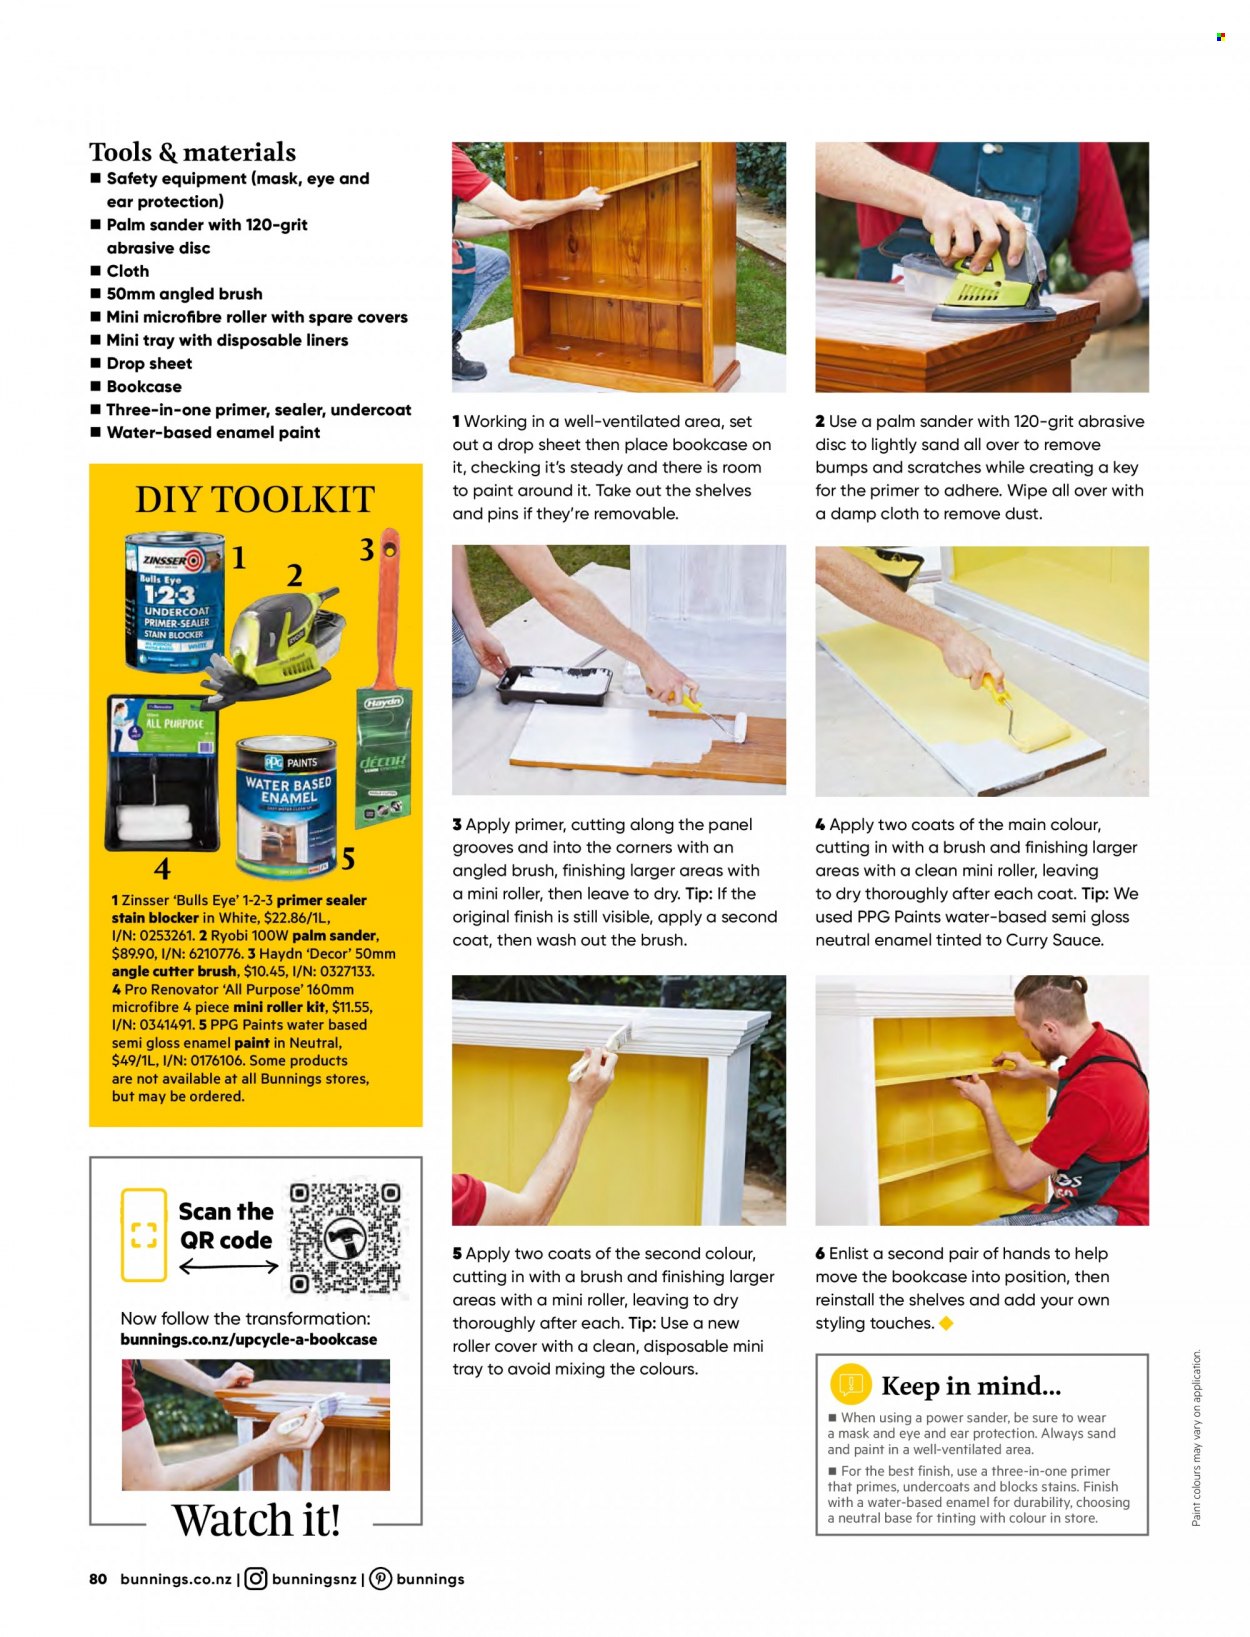 thumbnail - Bunnings Warehouse mailer - Sales products - bookcase, curry sauce, brush, gloss enamel, roller, plastic drop sheet, roller cover, paint, Ryobi, cutter. Page 80.